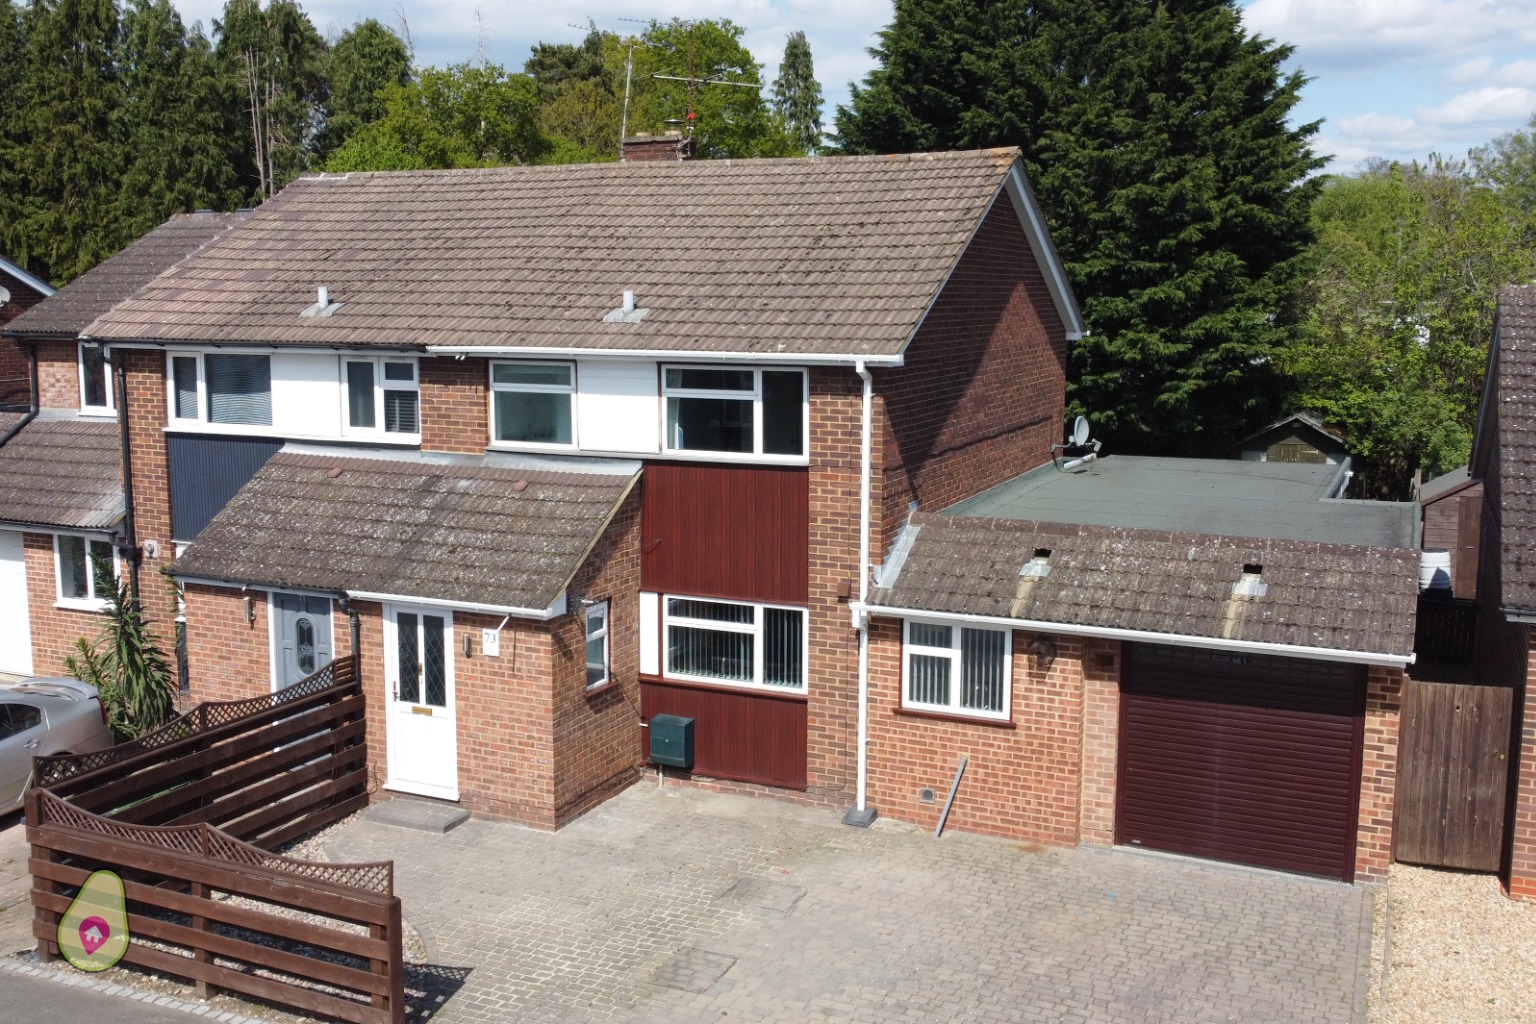 3 bed semi-detached house for sale in Frimley Grove Gardens, Camberley, GU16